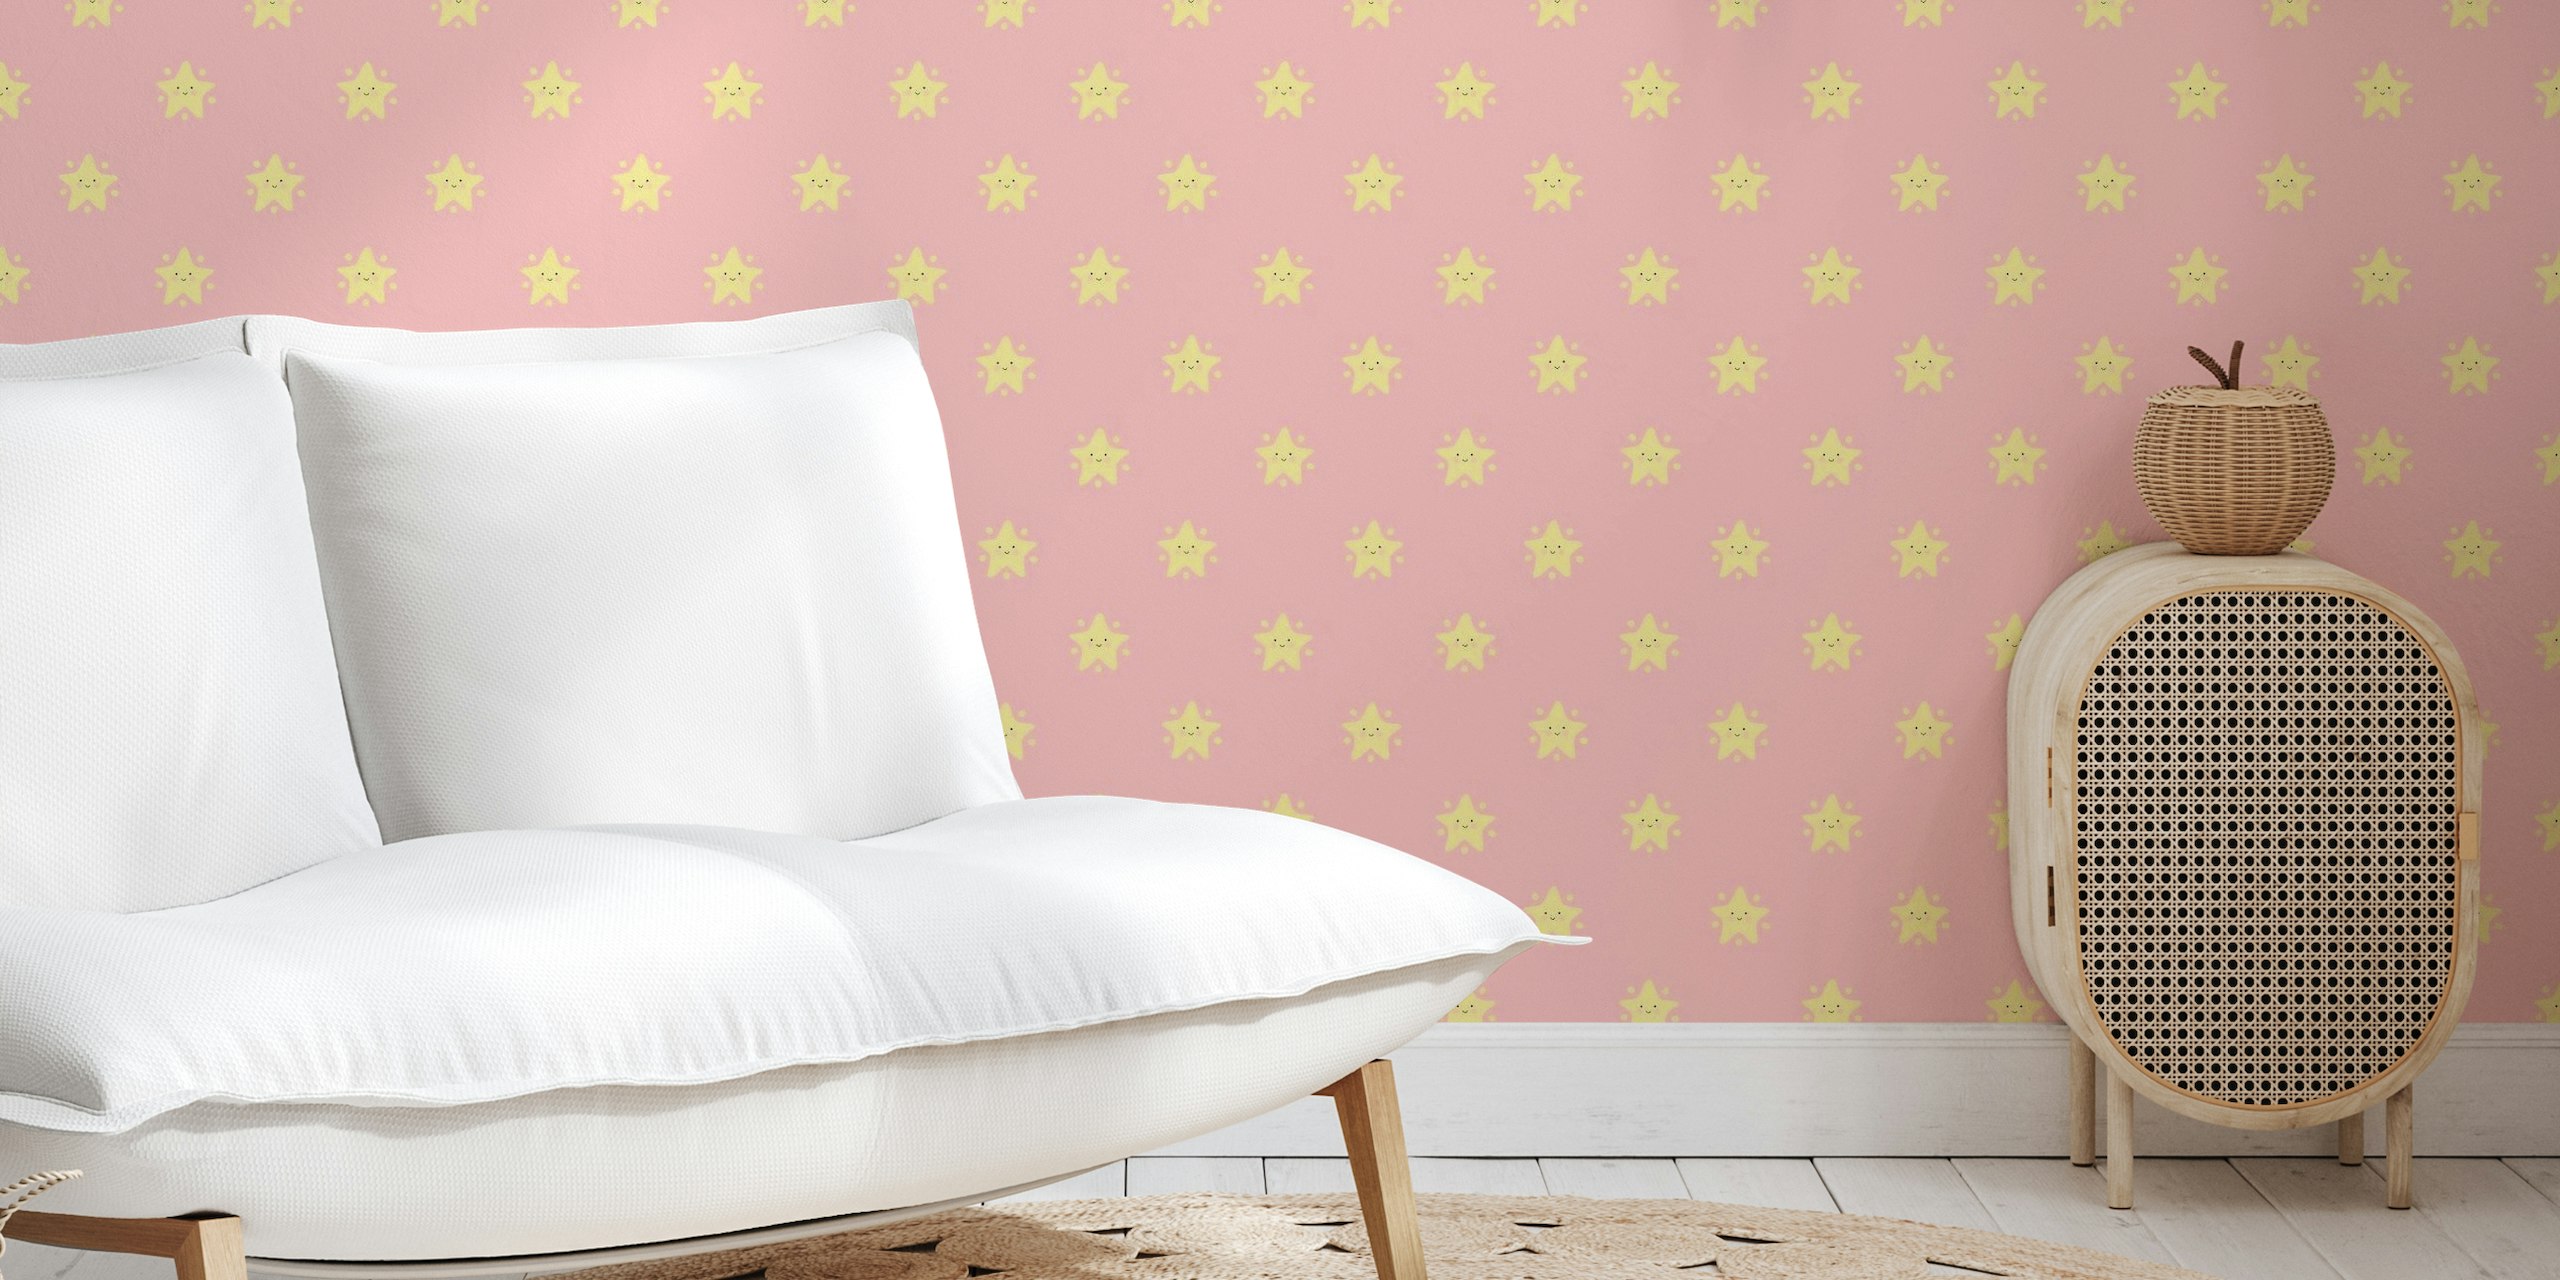 Smiling stars on pink background wall mural